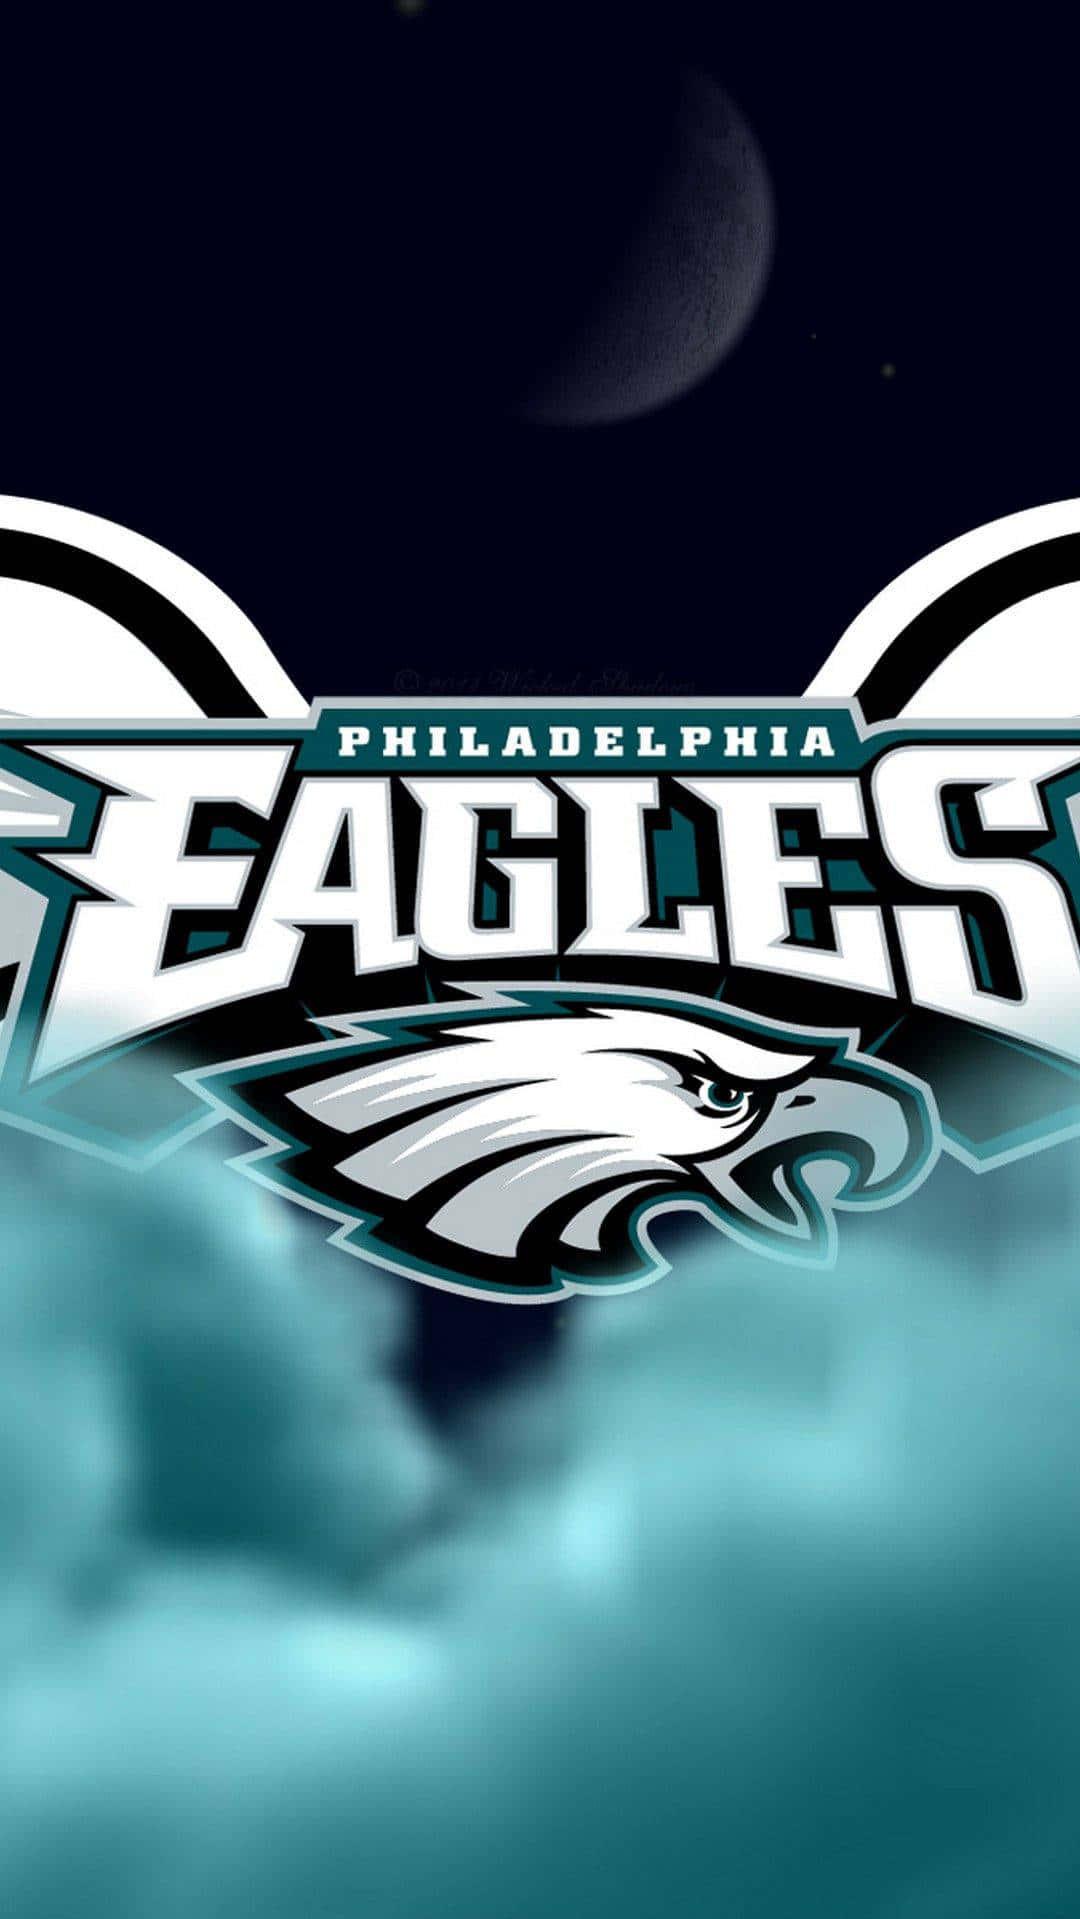 Get Ready For The New Season With Philadelphia Eagles